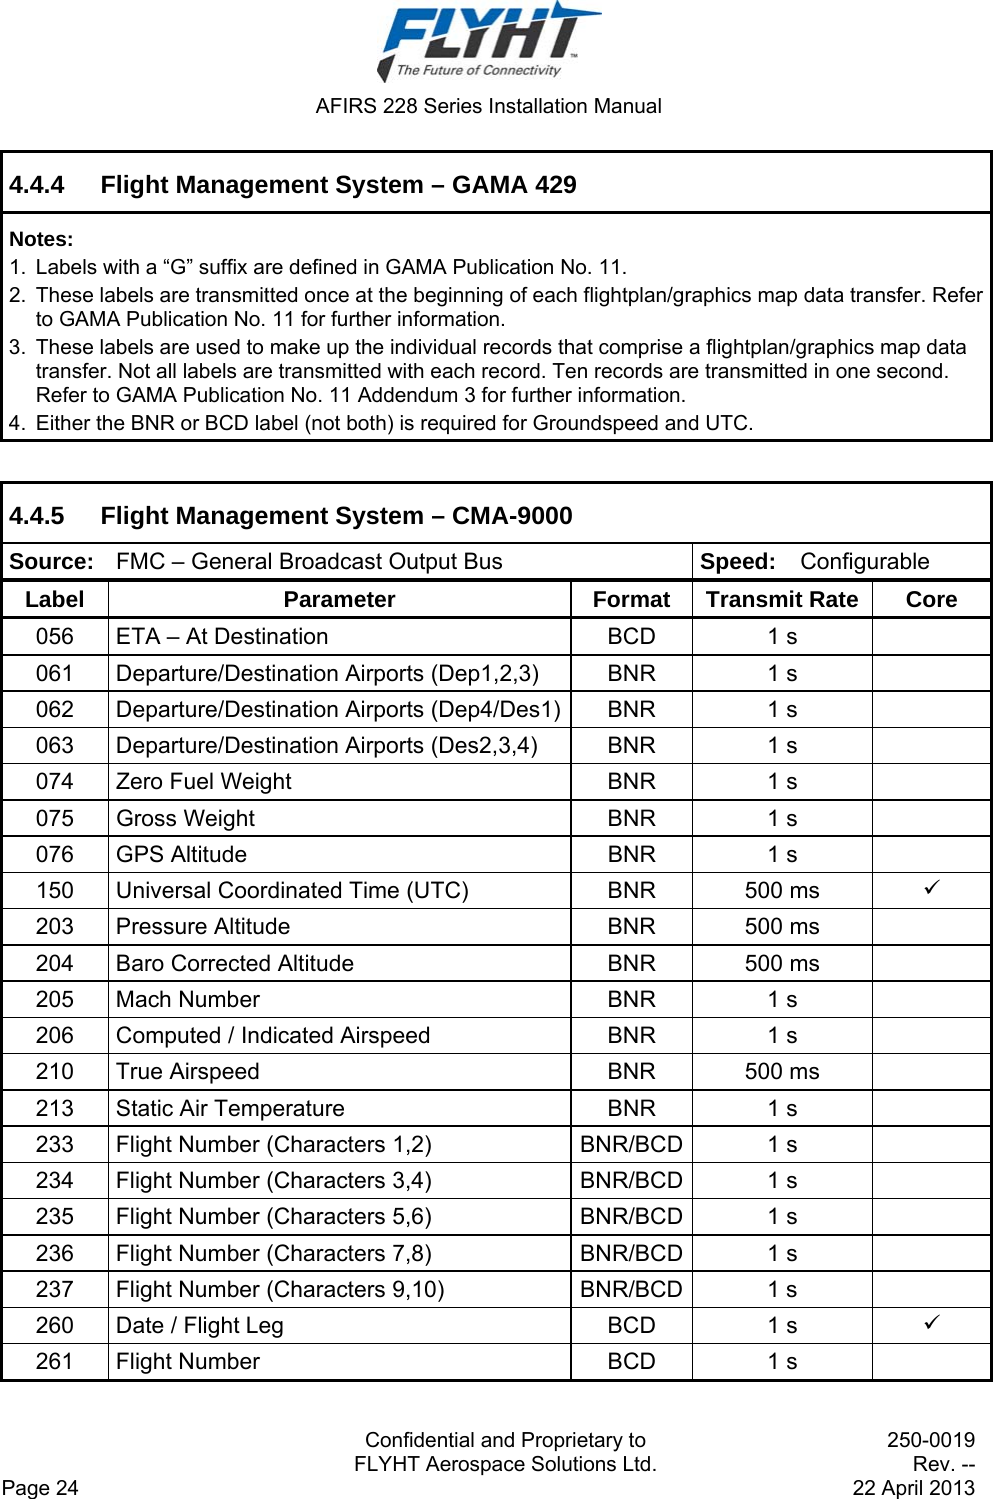  AFIRS 228 Series Installation Manual   Confidential and Proprietary to  250-0019   FLYHT Aerospace Solutions Ltd.  Rev. -- Page 24    22 April 2013 4.4.4  Flight Management System – GAMA 429 Notes: 1.  Labels with a “G” suffix are defined in GAMA Publication No. 11. 2.  These labels are transmitted once at the beginning of each flightplan/graphics map data transfer. Refer to GAMA Publication No. 11 for further information. 3.  These labels are used to make up the individual records that comprise a flightplan/graphics map data transfer. Not all labels are transmitted with each record. Ten records are transmitted in one second. Refer to GAMA Publication No. 11 Addendum 3 for further information. 4.  Either the BNR or BCD label (not both) is required for Groundspeed and UTC.  4.4.5 Flight Management System – CMA-9000 Source:  FMC – General Broadcast Output Bus  Speed:  Configurable Label Parameter Format Transmit Rate Core 056  ETA – At Destination  BCD  1 s   061  Departure/Destination Airports (Dep1,2,3)  BNR  1 s   062  Departure/Destination Airports (Dep4/Des1) BNR  1 s   063  Departure/Destination Airports (Des2,3,4)  BNR  1 s   074  Zero Fuel Weight  BNR  1 s   075  Gross Weight  BNR  1 s   076  GPS Altitude  BNR  1 s   150  Universal Coordinated Time (UTC)  BNR  500 ms   203  Pressure Altitude  BNR  500 ms   204  Baro Corrected Altitude  BNR  500 ms   205  Mach Number  BNR  1 s   206  Computed / Indicated Airspeed  BNR  1 s   210  True Airspeed  BNR  500 ms   213  Static Air Temperature  BNR  1 s   233  Flight Number (Characters 1,2)  BNR/BCD 1 s   234  Flight Number (Characters 3,4)  BNR/BCD 1 s   235  Flight Number (Characters 5,6)  BNR/BCD 1 s   236  Flight Number (Characters 7,8)  BNR/BCD 1 s   237  Flight Number (Characters 9,10)  BNR/BCD 1 s   260  Date / Flight Leg  BCD  1 s   261  Flight Number  BCD  1 s   